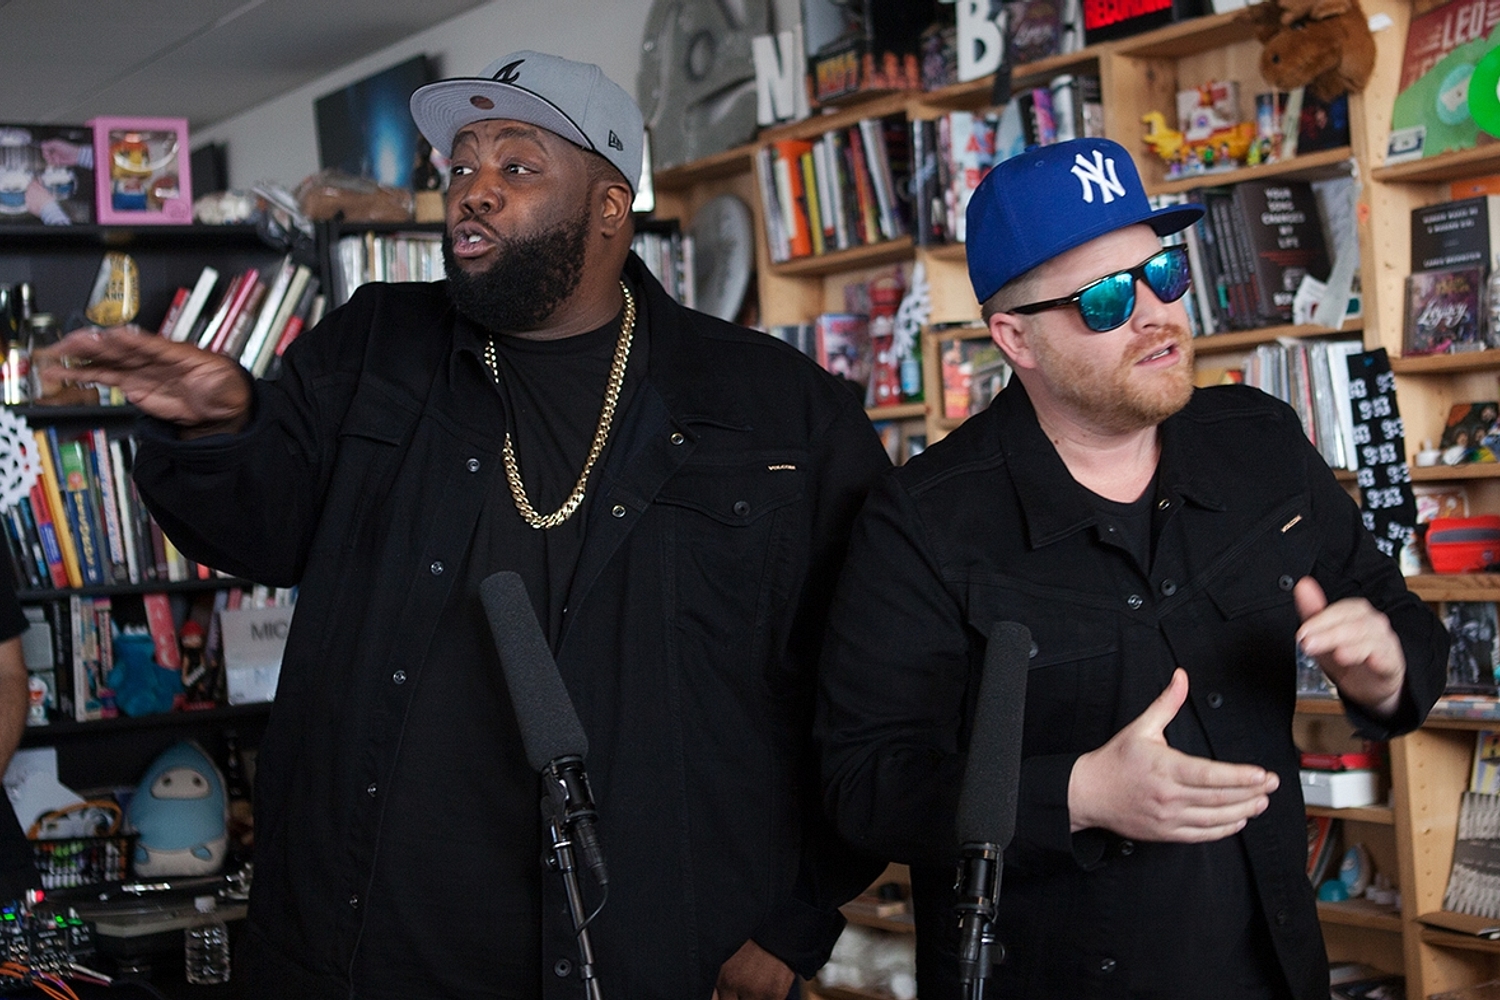 Watch Run The Jewels perform a Tiny Desk Concert